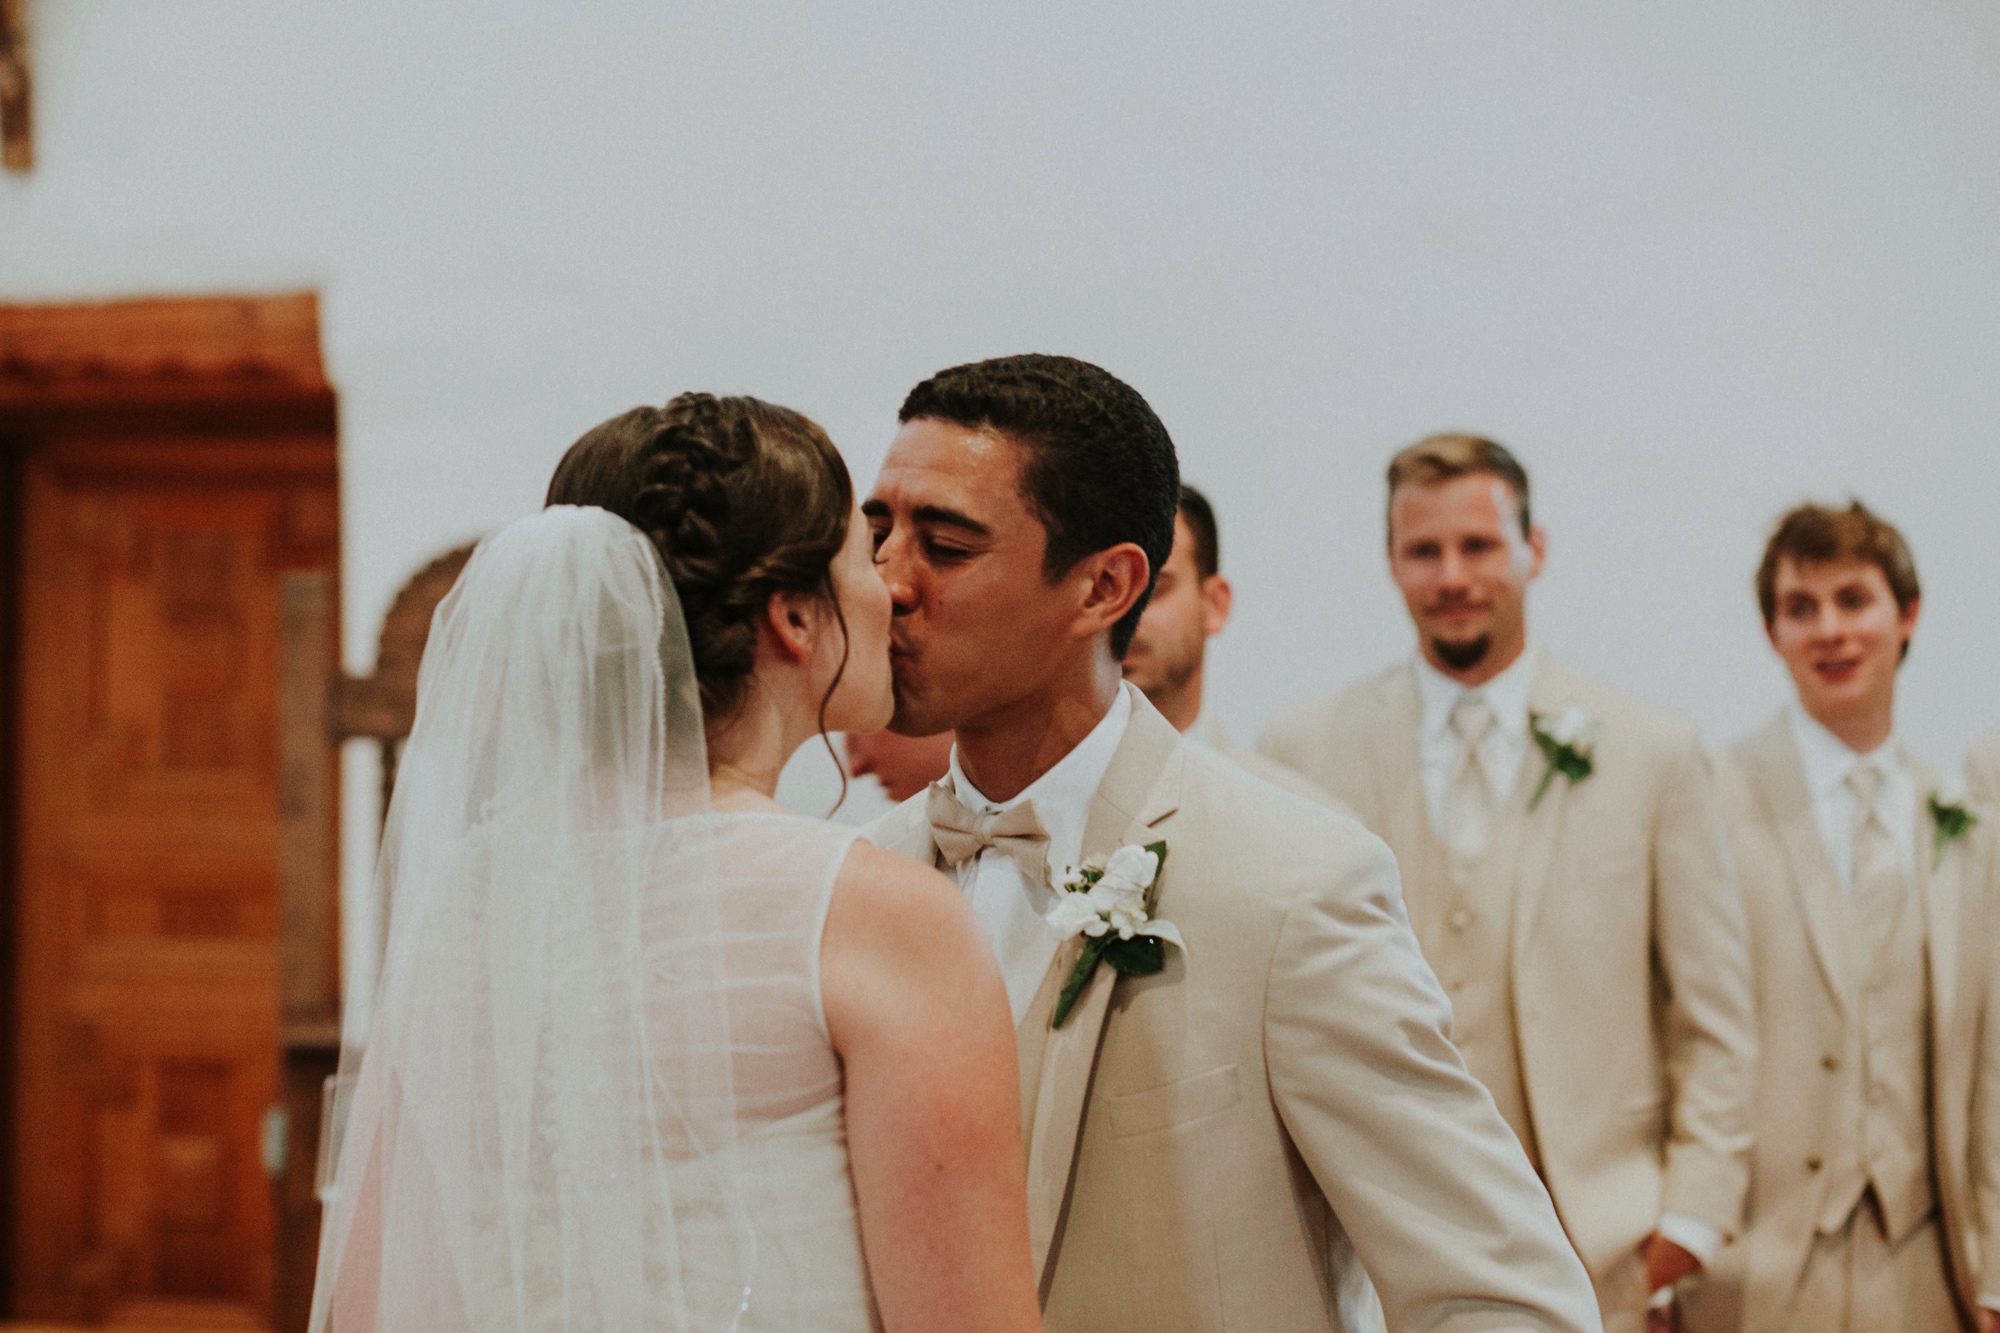  Katie and Frankie’s wedding was what Santa Fe summer wedding dreams are made of! They had a gorgeous catholic wedding ceremony at the Cristo Rey Catholic Church in Santa Fe, New Mexico followed by a fabulous travel-themed wedding reception at La Pos